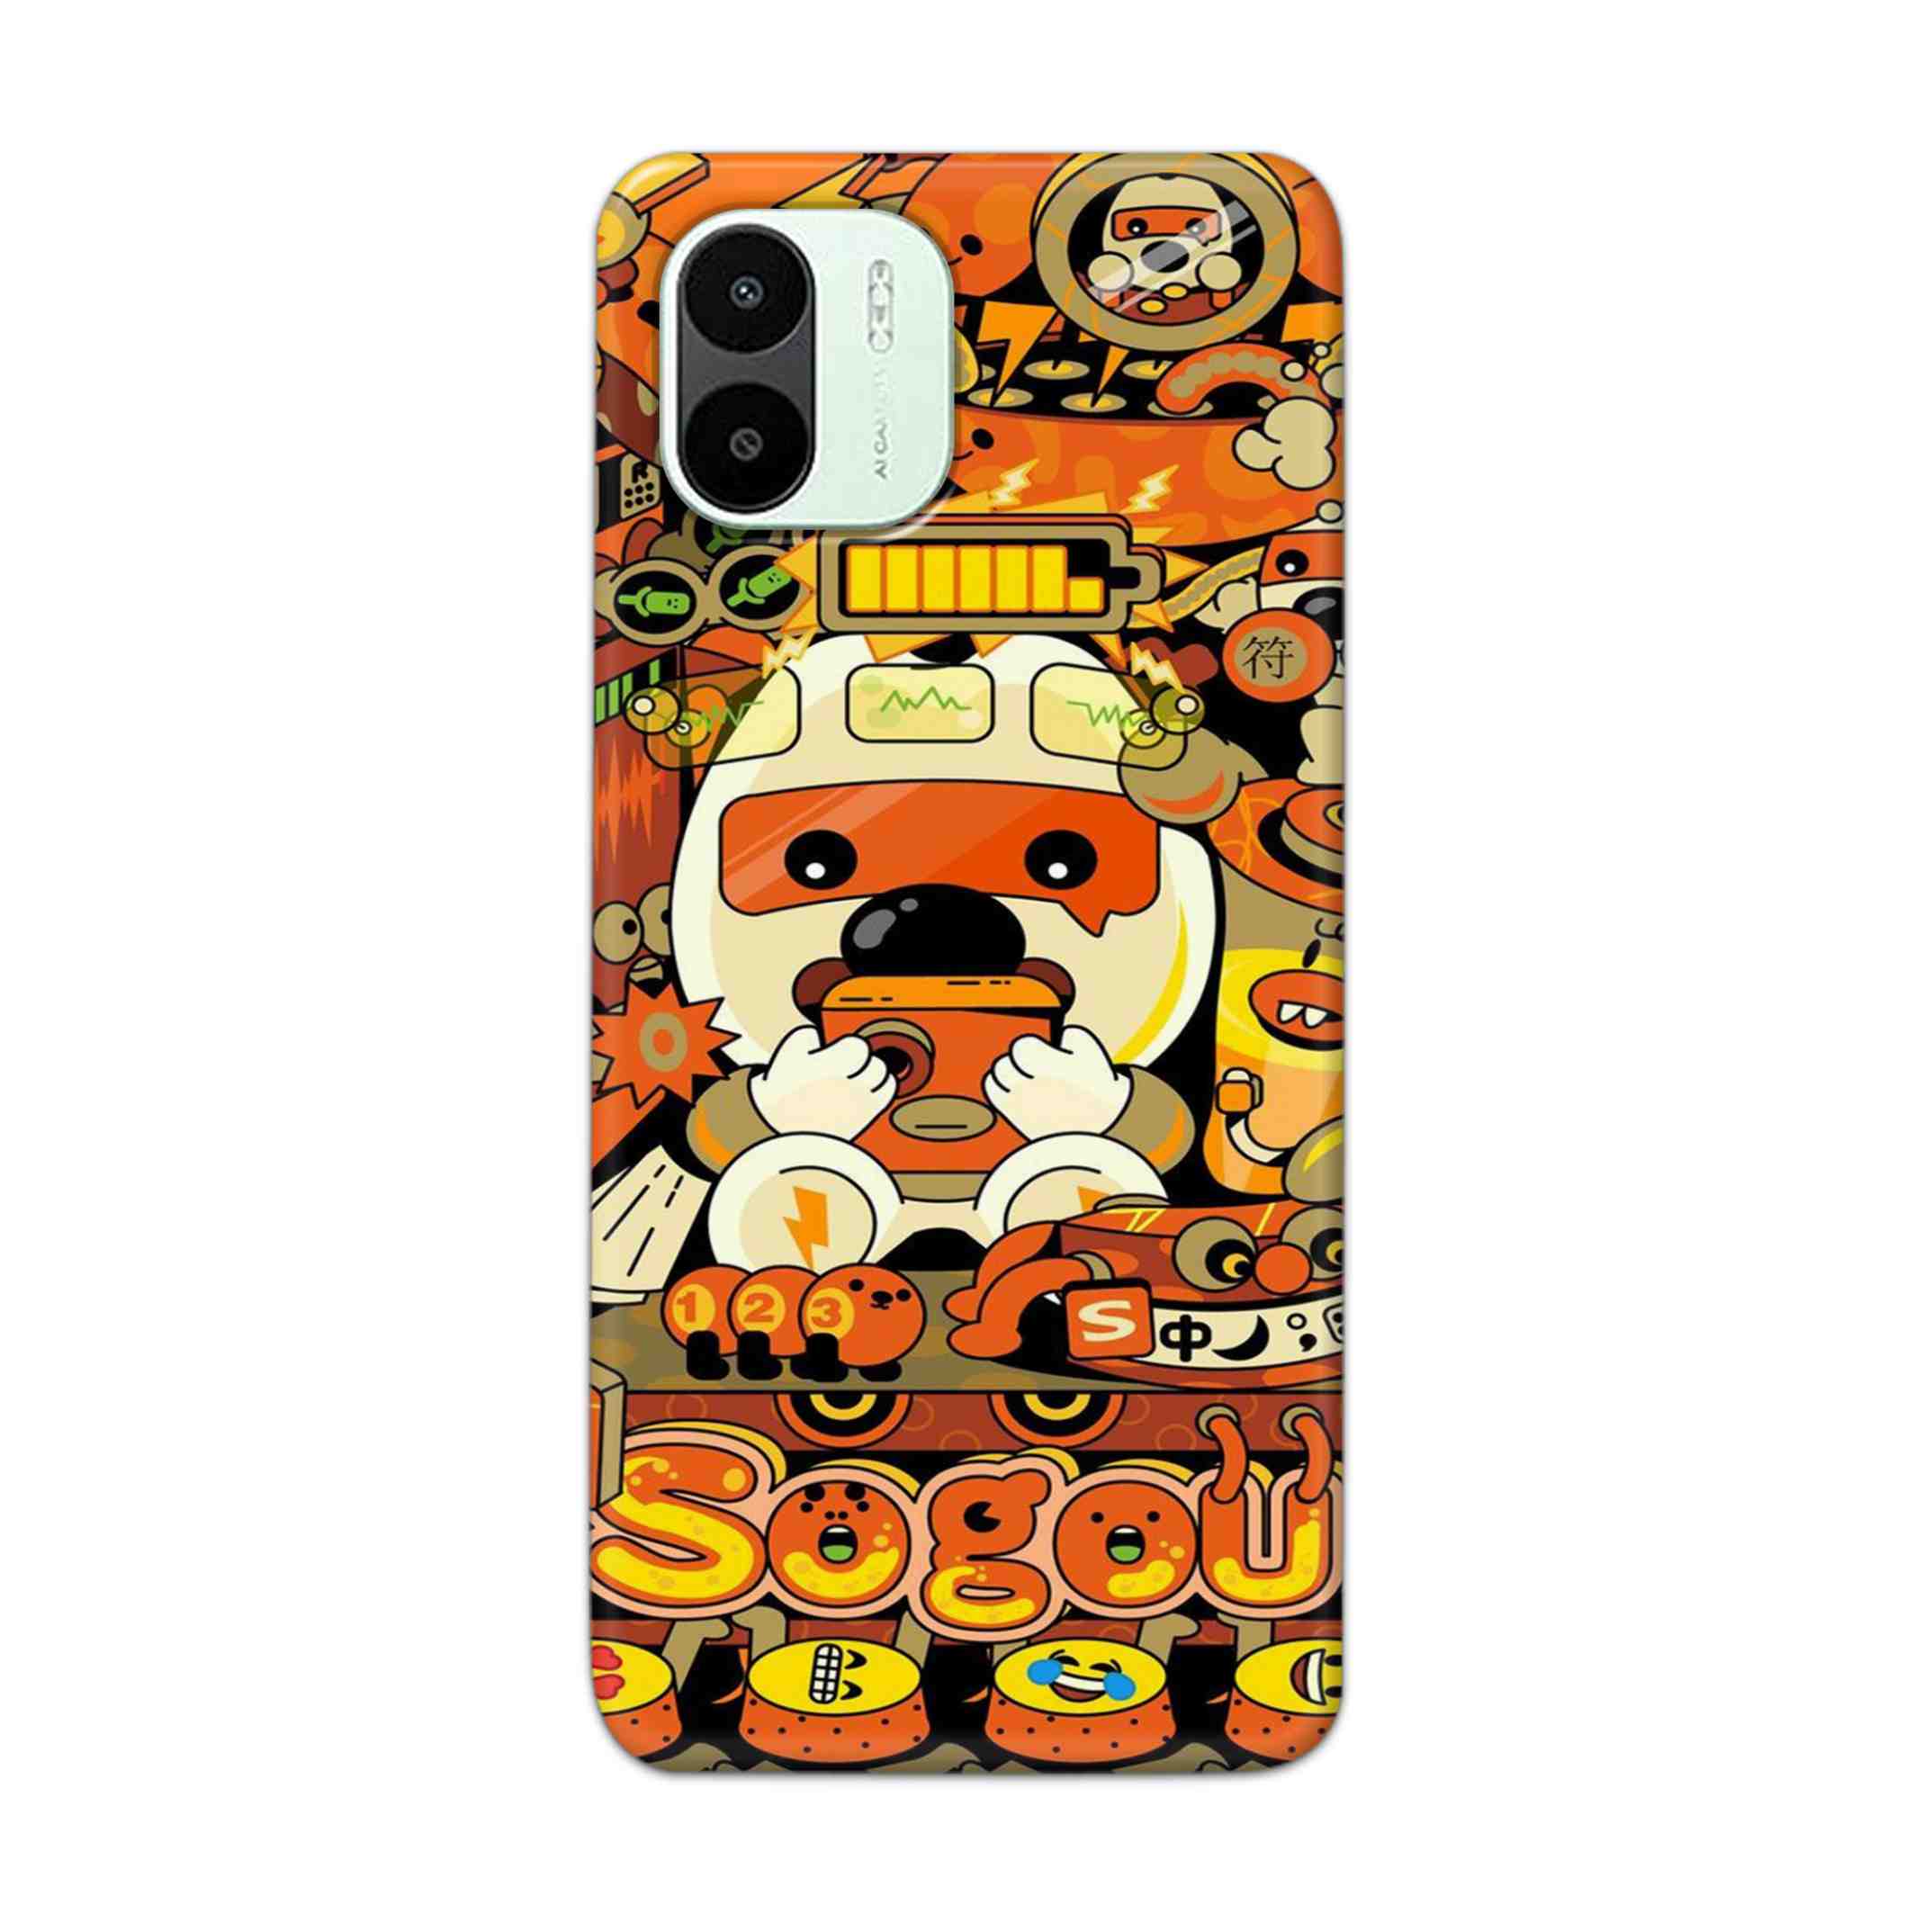 Buy Sogou Hard Back Mobile Phone Case Cover For Xiaomi Redmi A1 5G Online